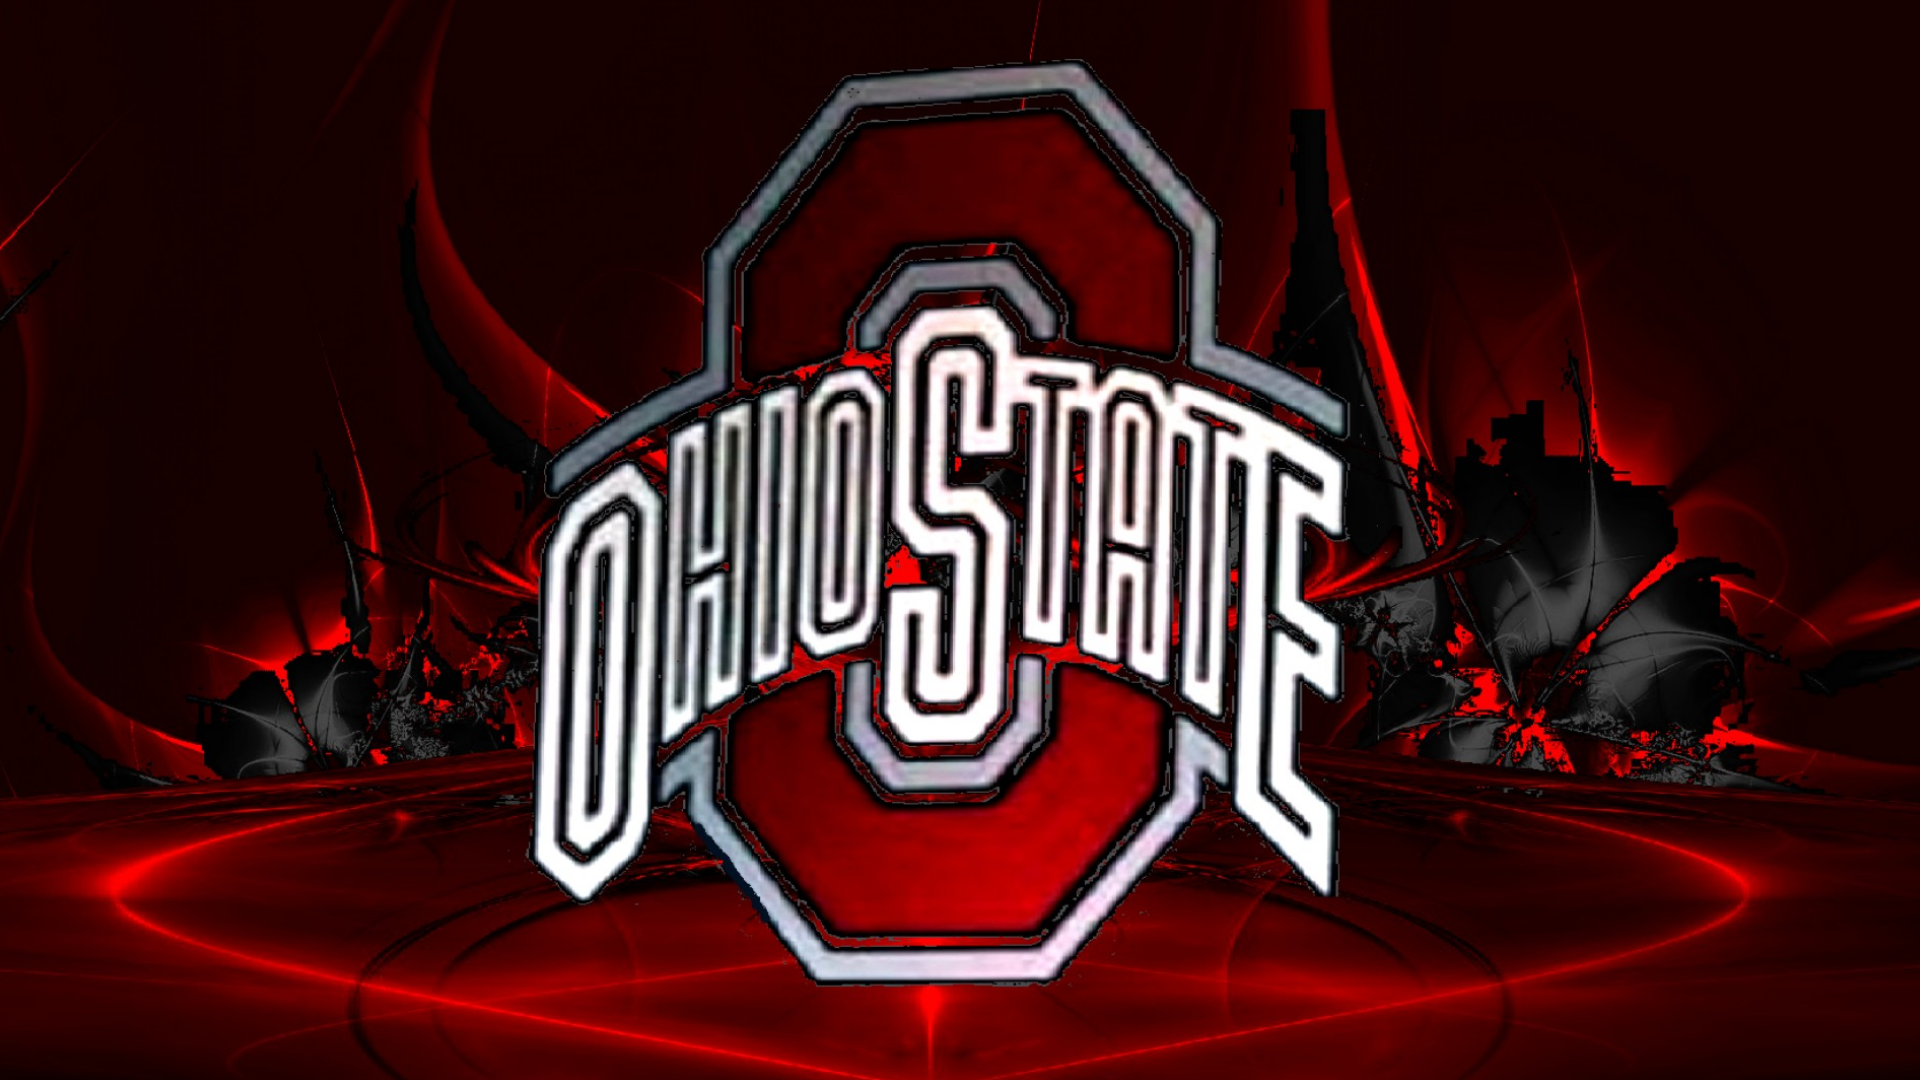 Ohio State Red Block O On An Abstract - Ohio Stadium - 1920x1080 Wallpaper  